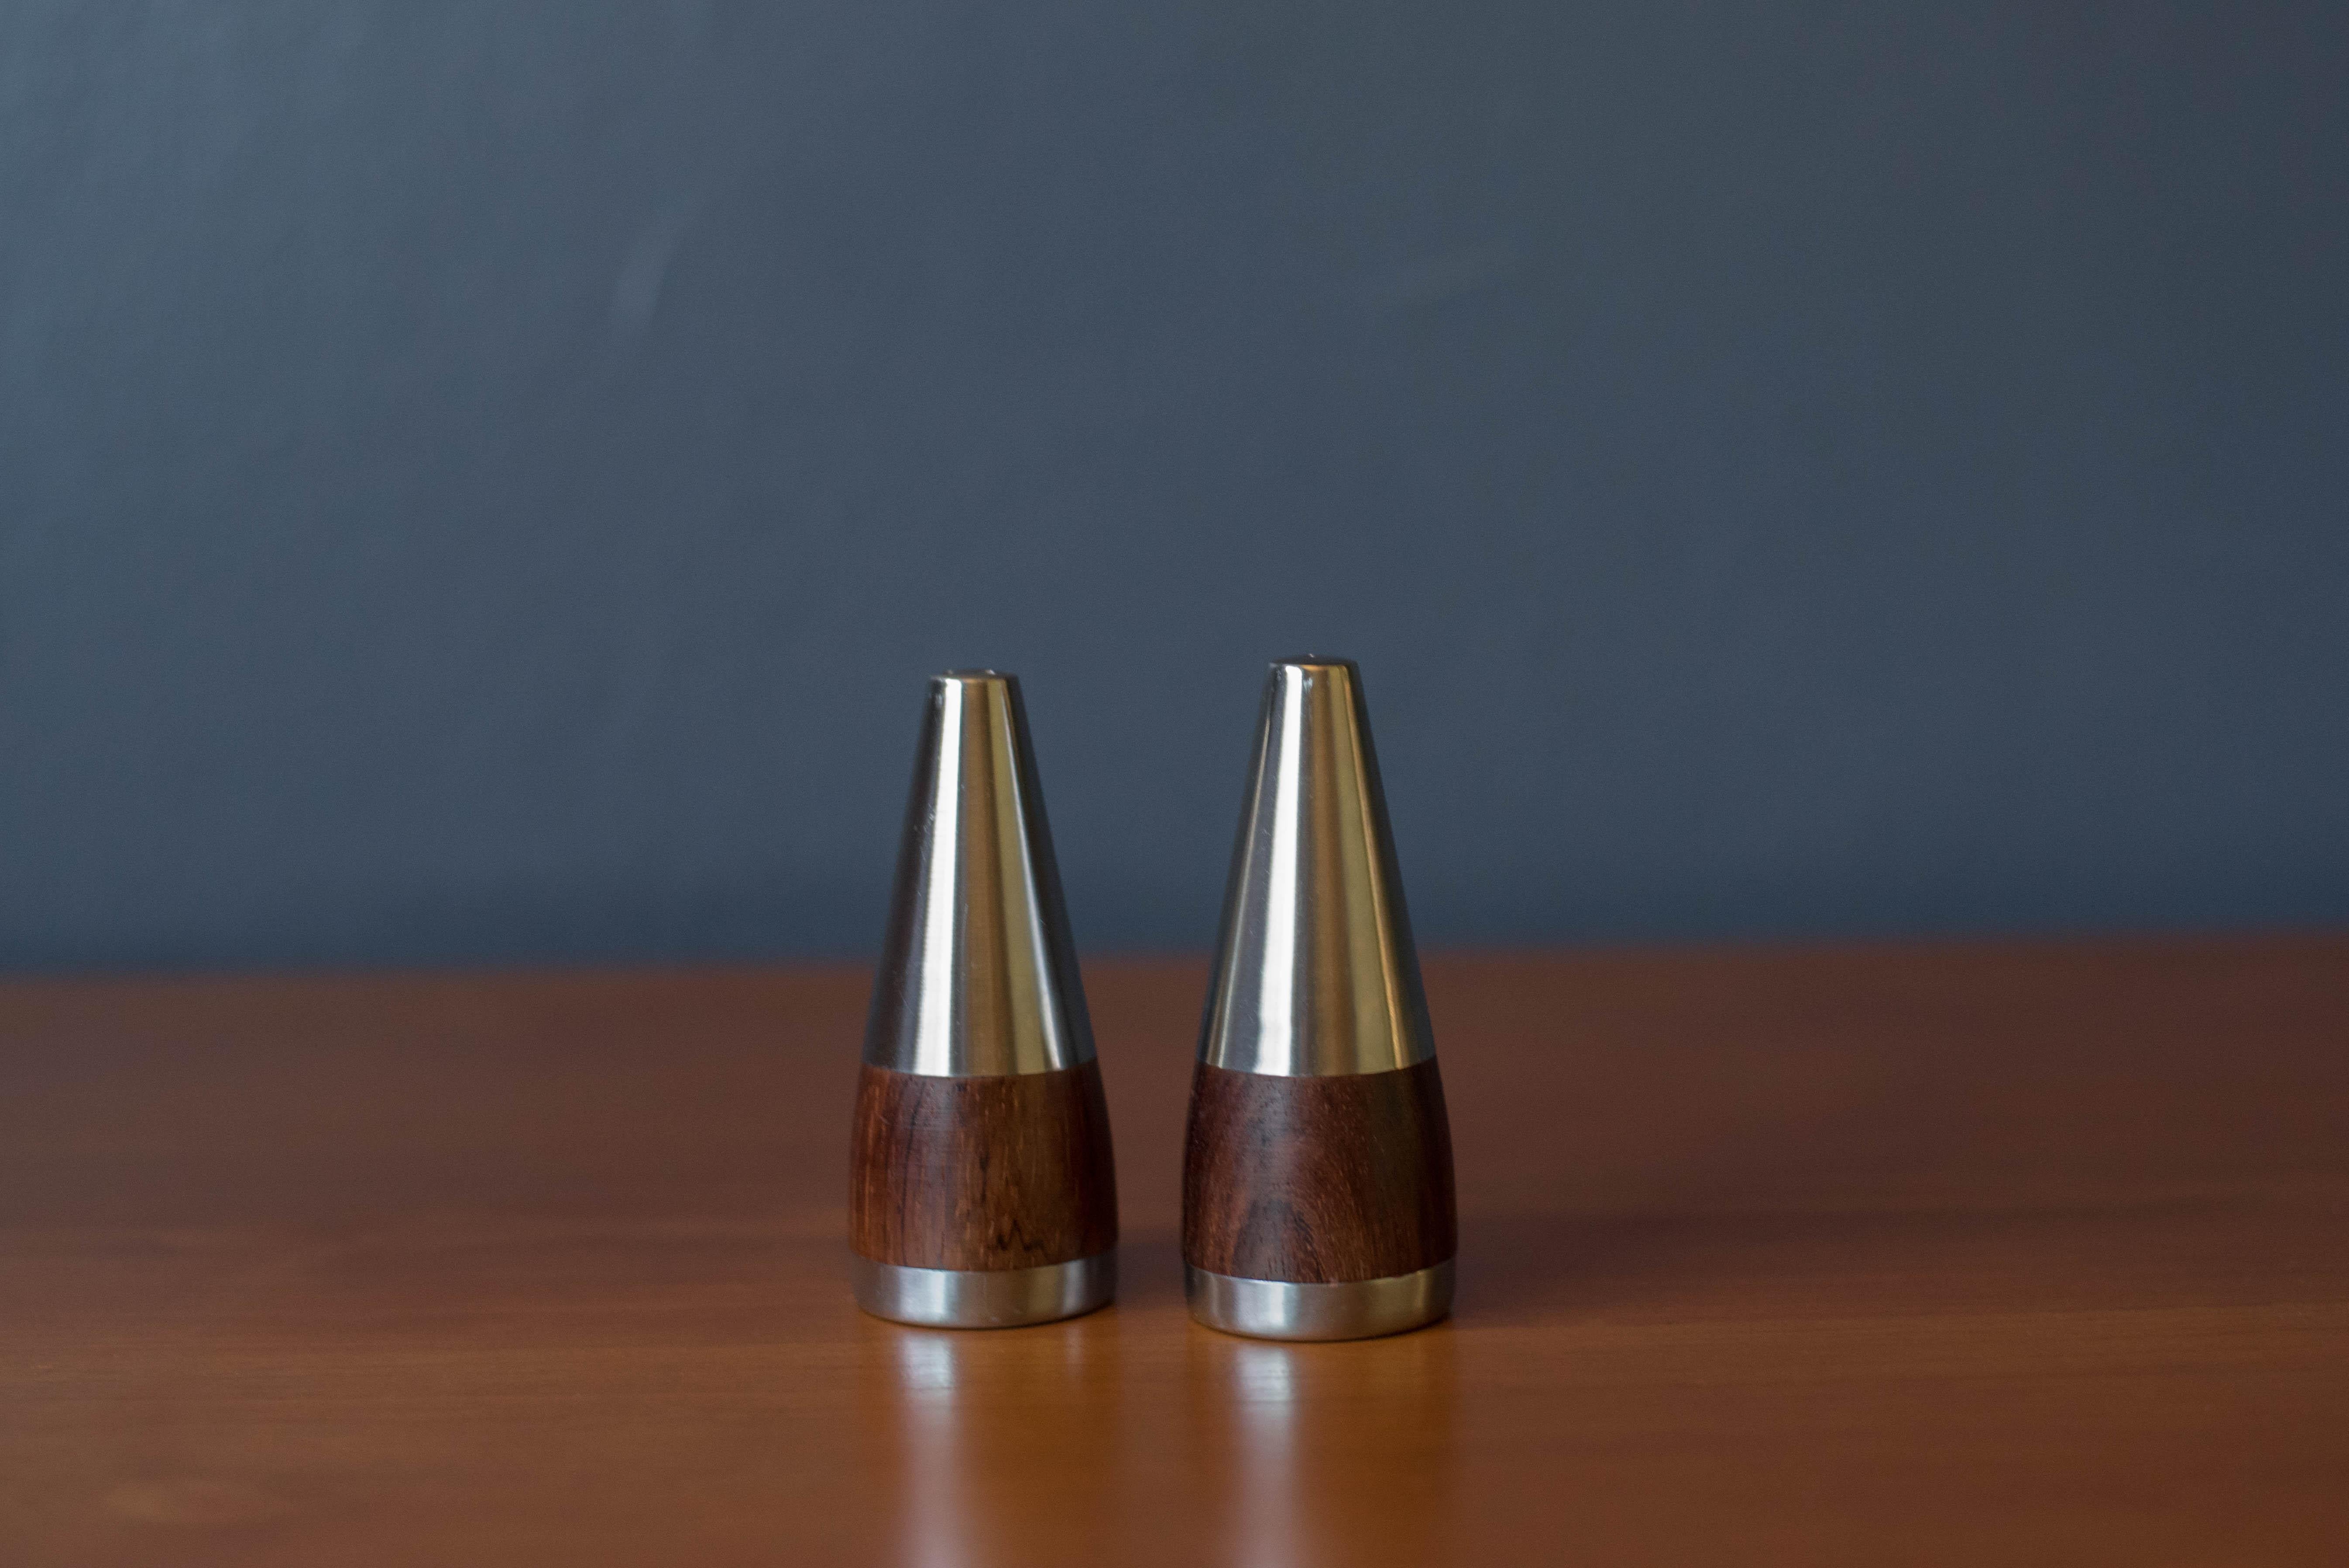 Mid-Century Modern pair of salt and pepper shaker dispensers manufactured by Stelton, Denmark circa 1960's. This stainless steel set displays contrasting rosewood grains and includes a labeled rubber stopper on the bottom. 

 


Offered by Mid